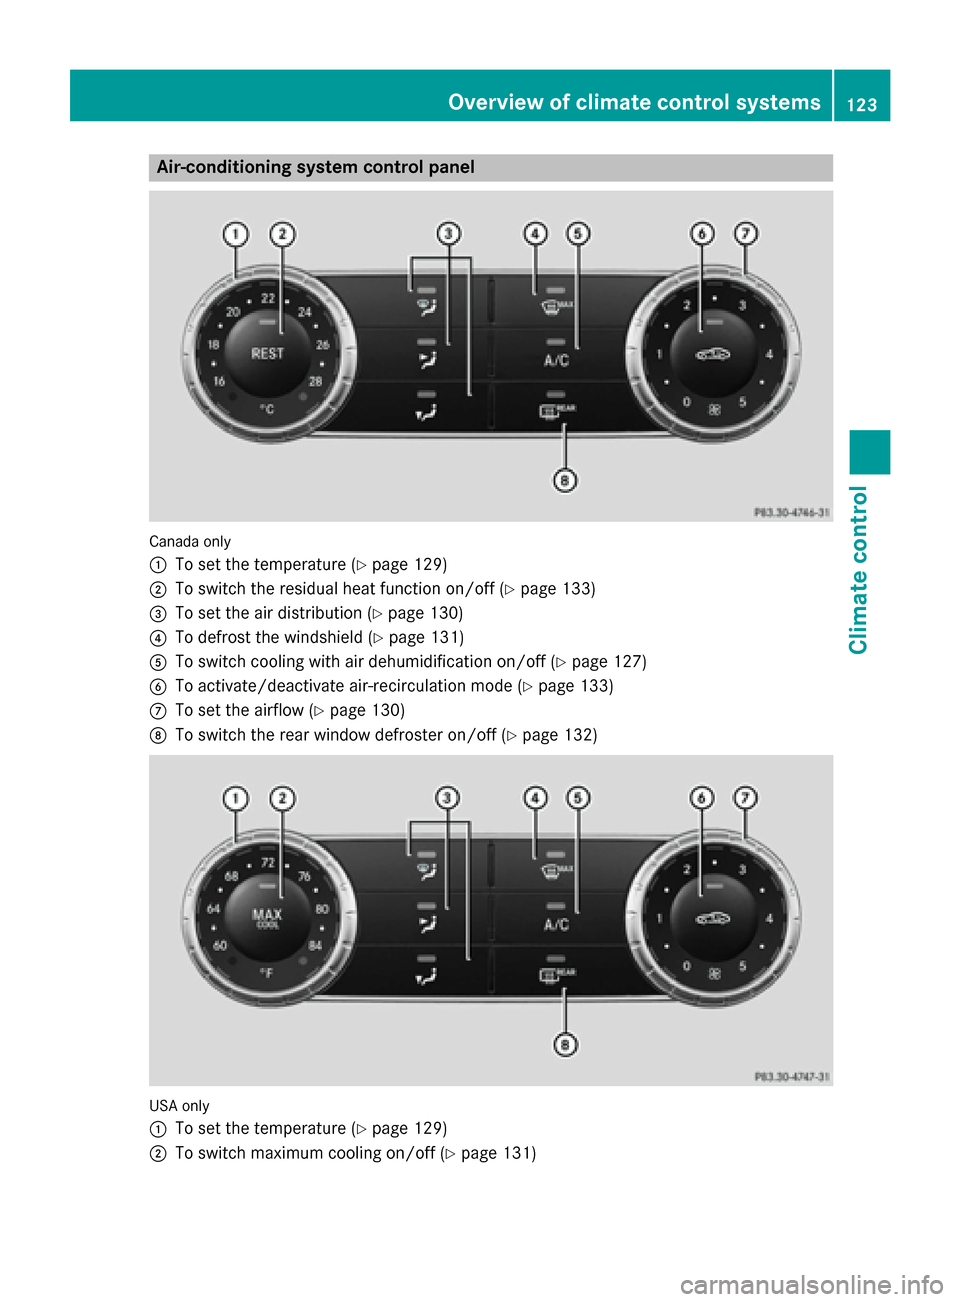 MERCEDES-BENZ SLK-Class 2015 R172 Owners Manual Air-conditioning system control panel
Canada only
0043
To set the temperature (Y page 129)
0044 To switch the residual heat function on/off (Y page 133)
0087 To set the air distribution (Y page 130)
0